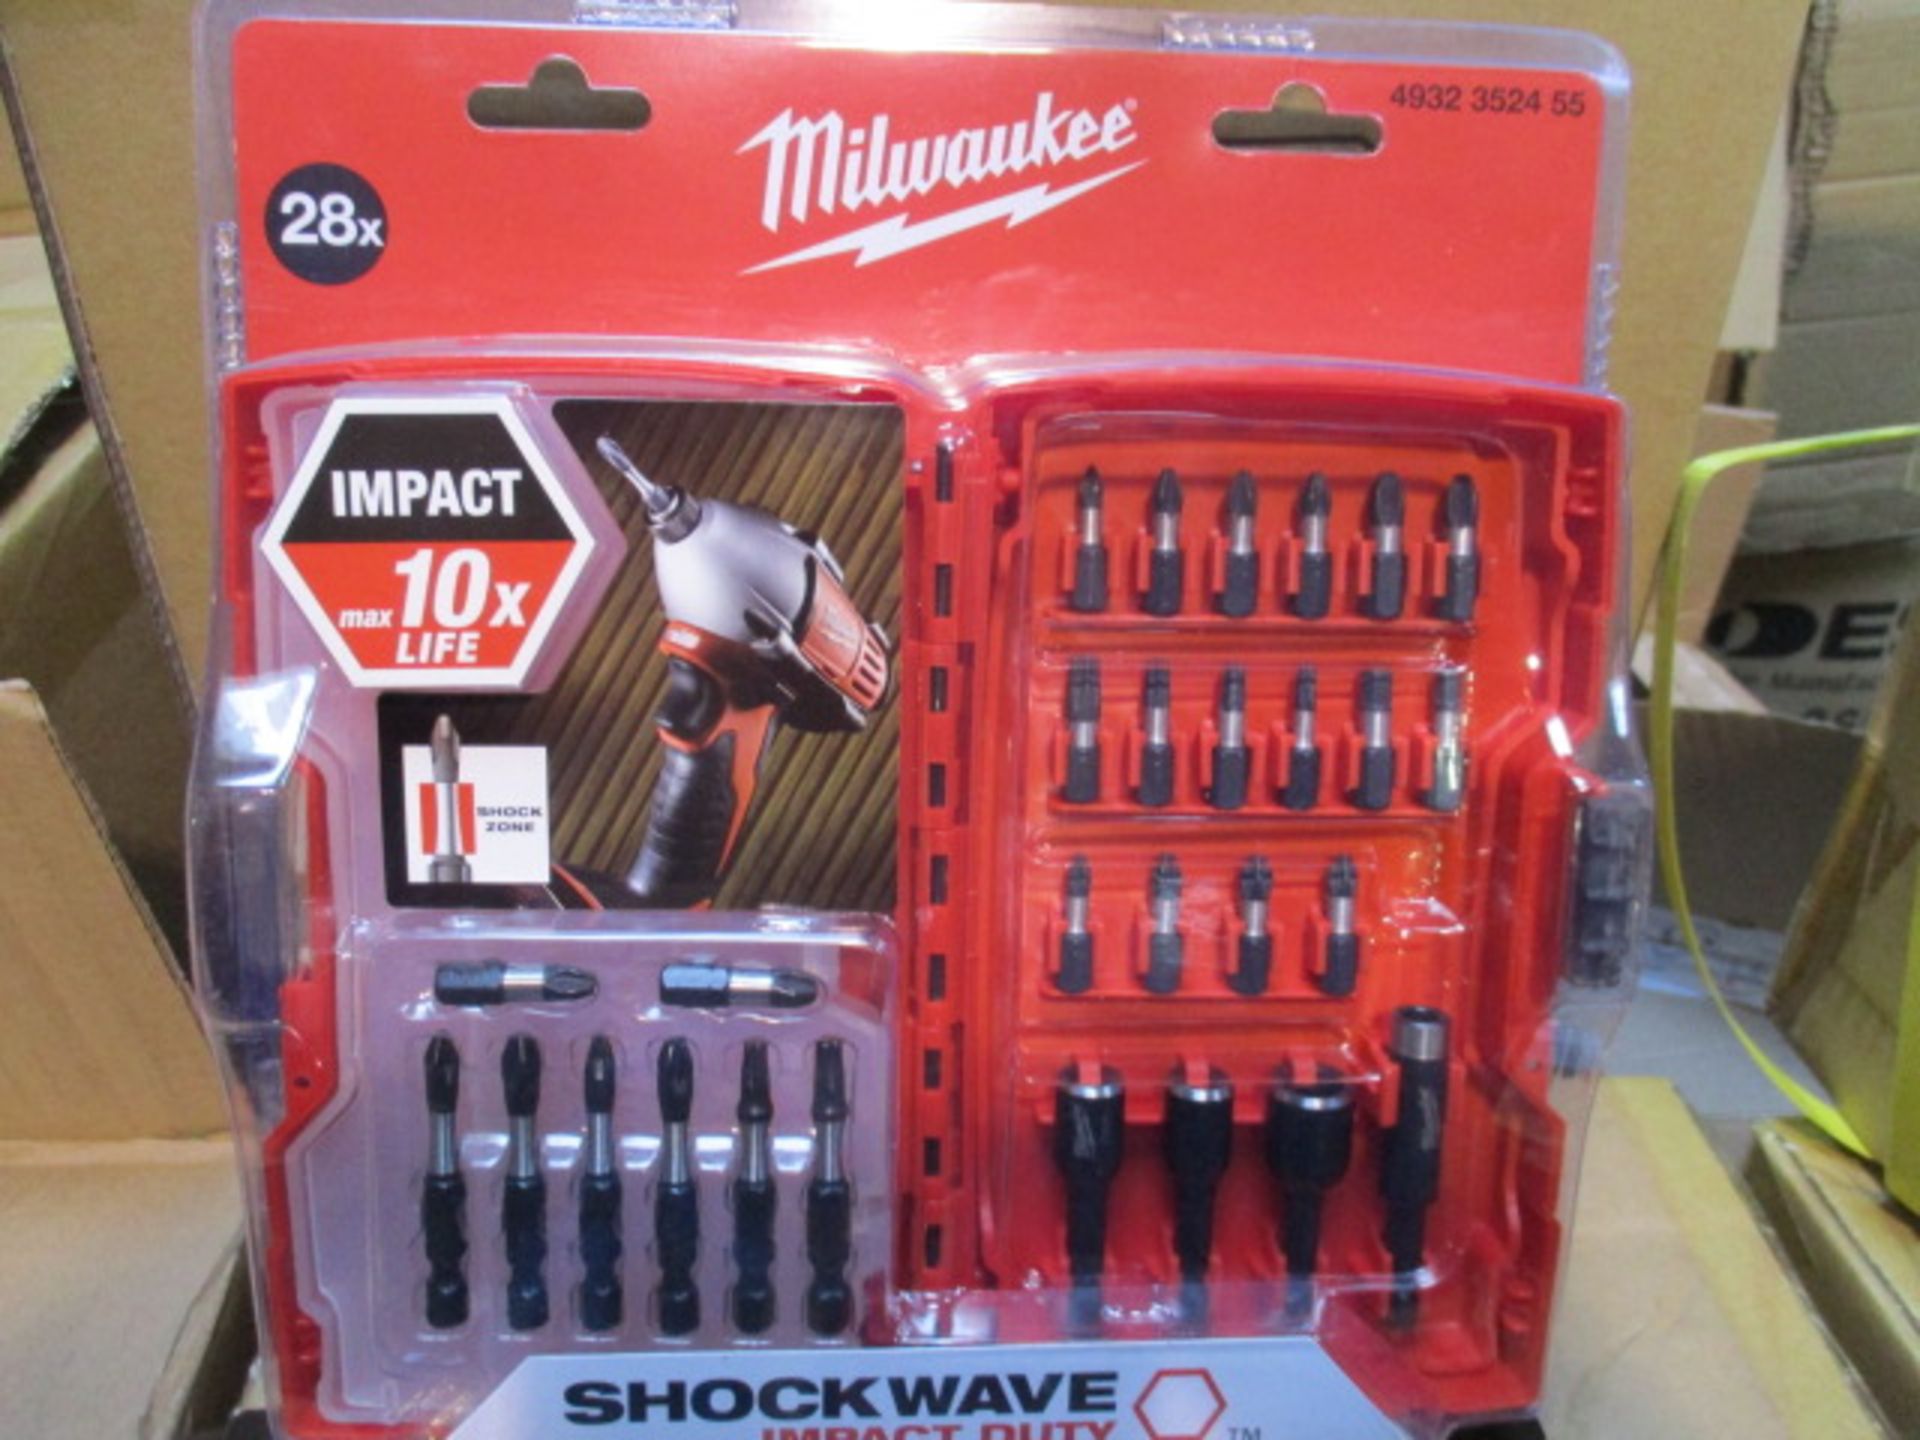 1pc - Factory Sealed Milwaukee 28pc Shockwave Impact driver and bit set - rrp £34.95 .